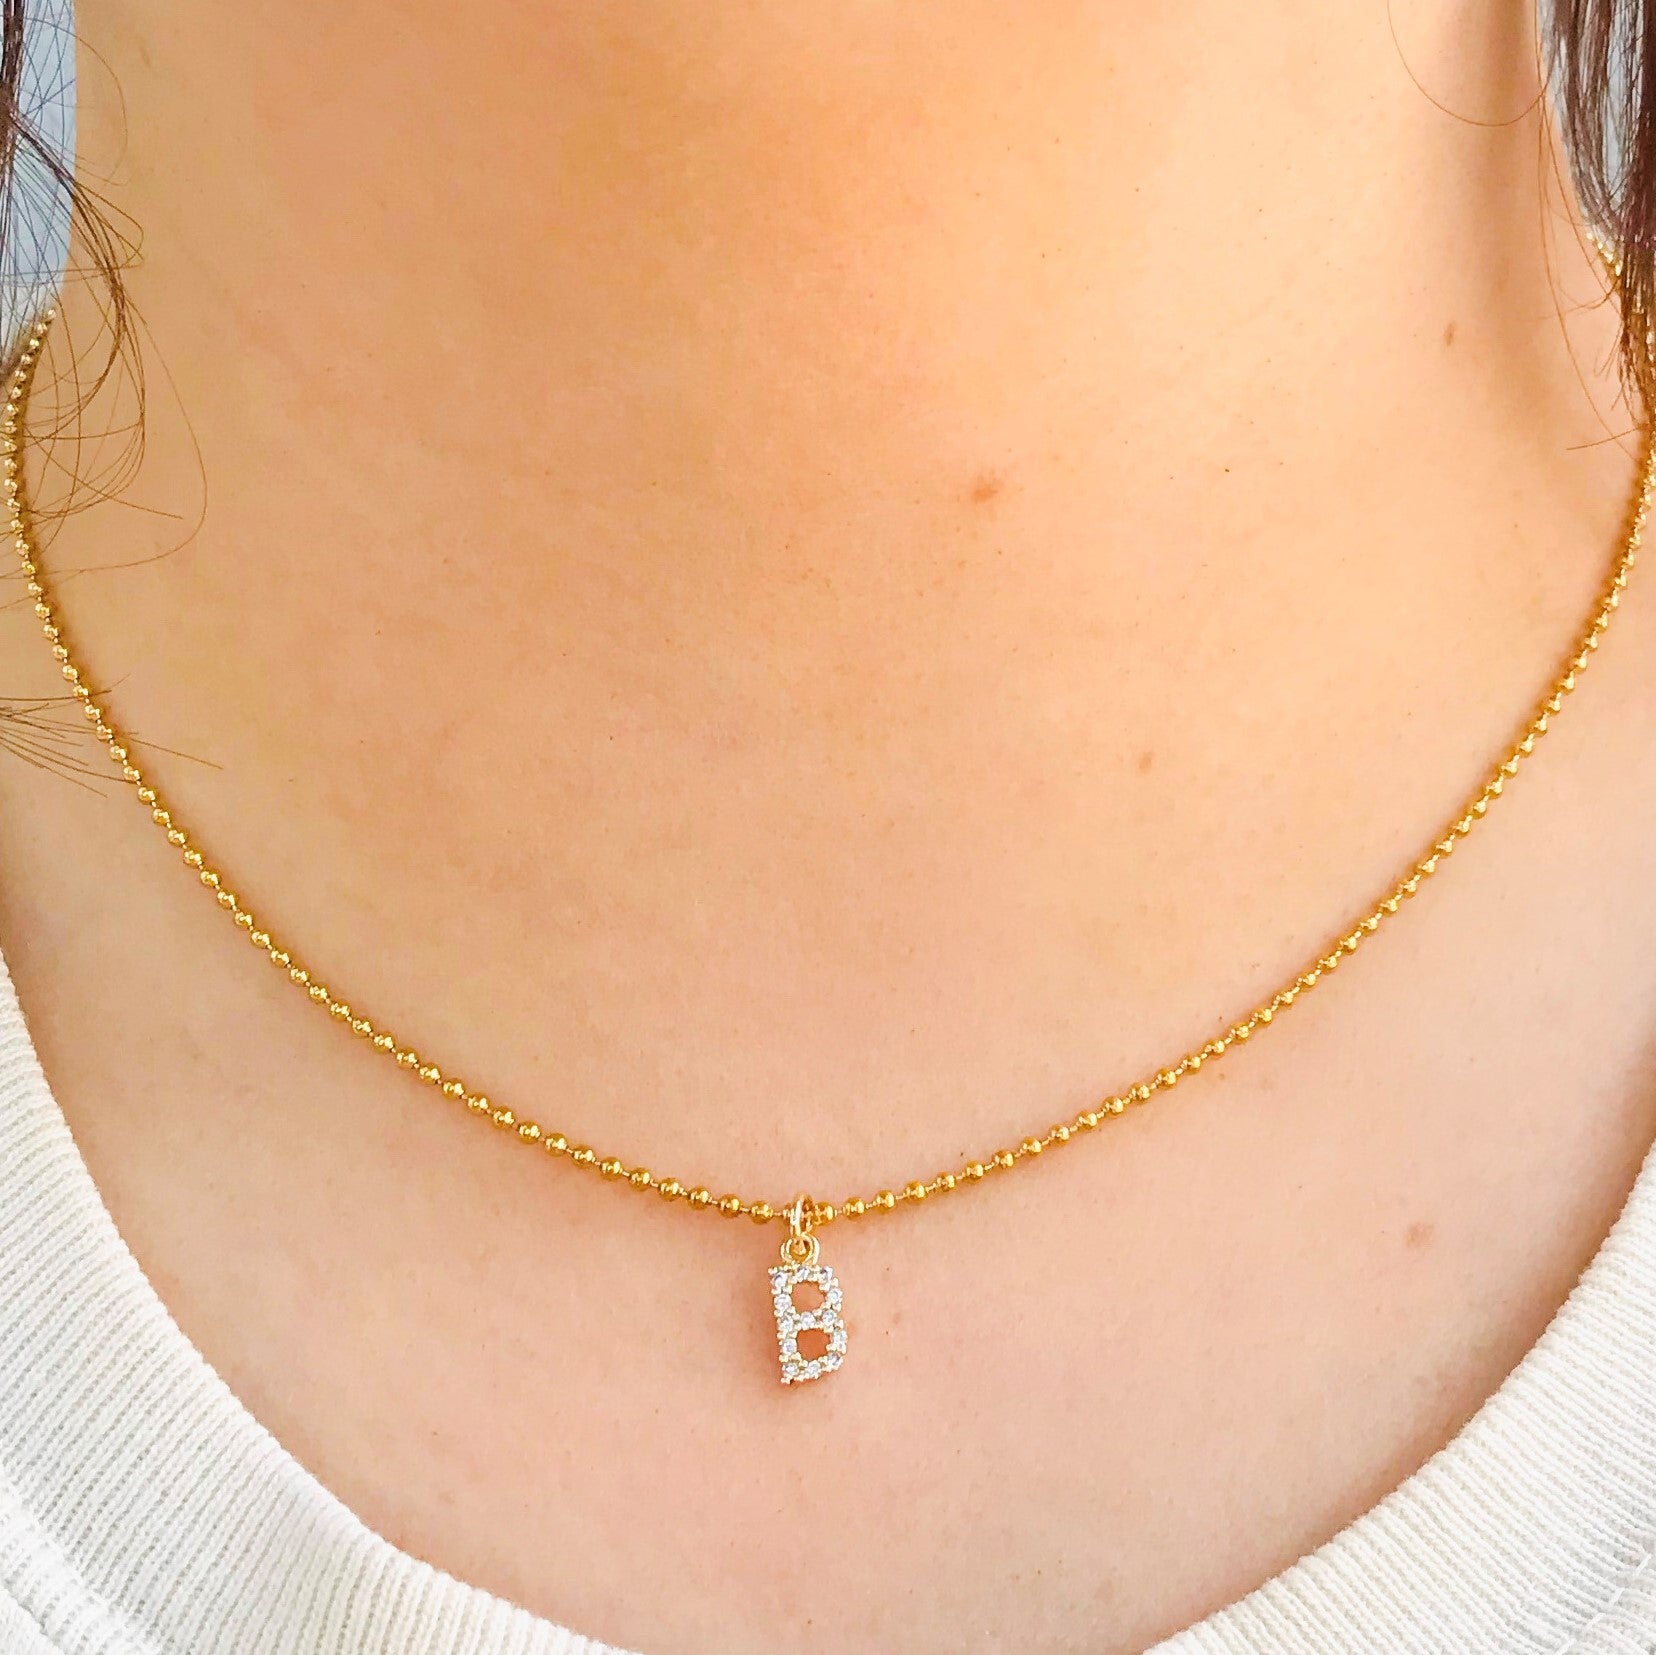 Aspen Sylvia Dainty Initial Letter Necklace